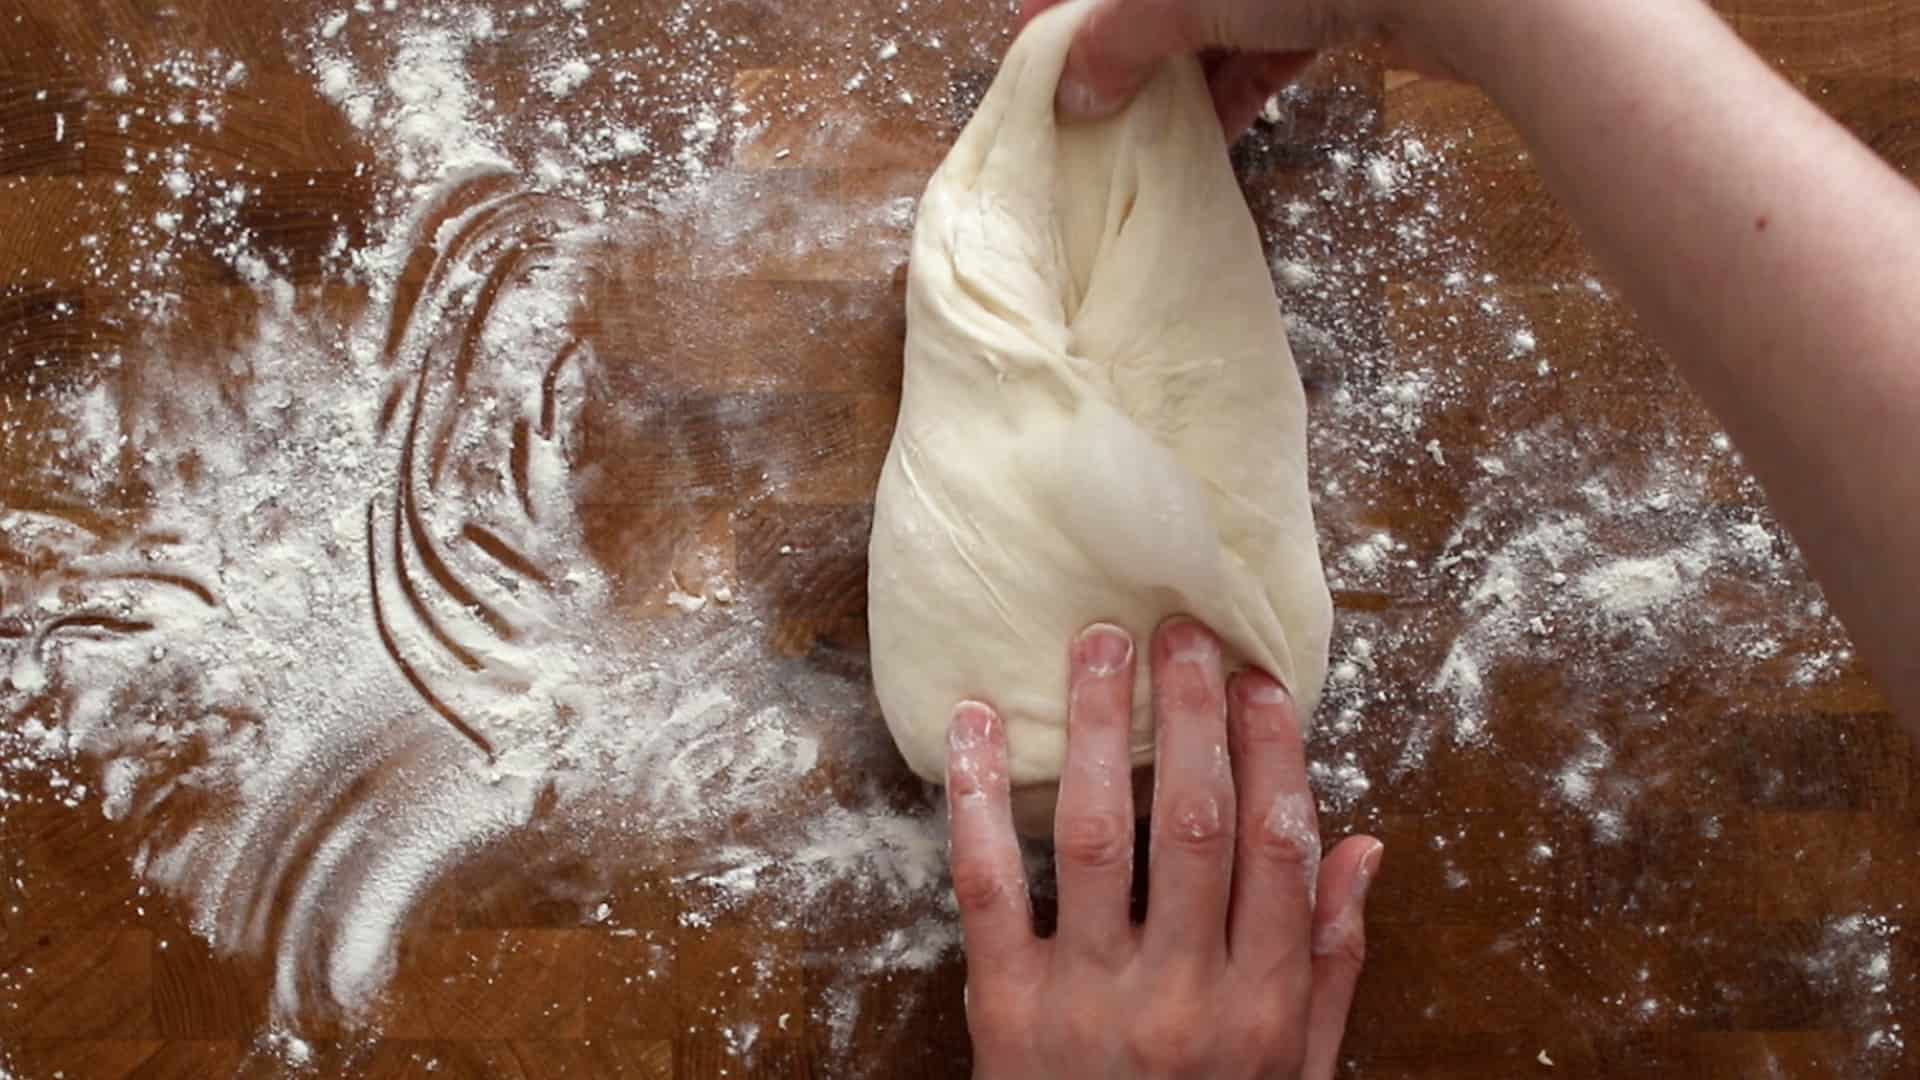 Stretching the last dough flap